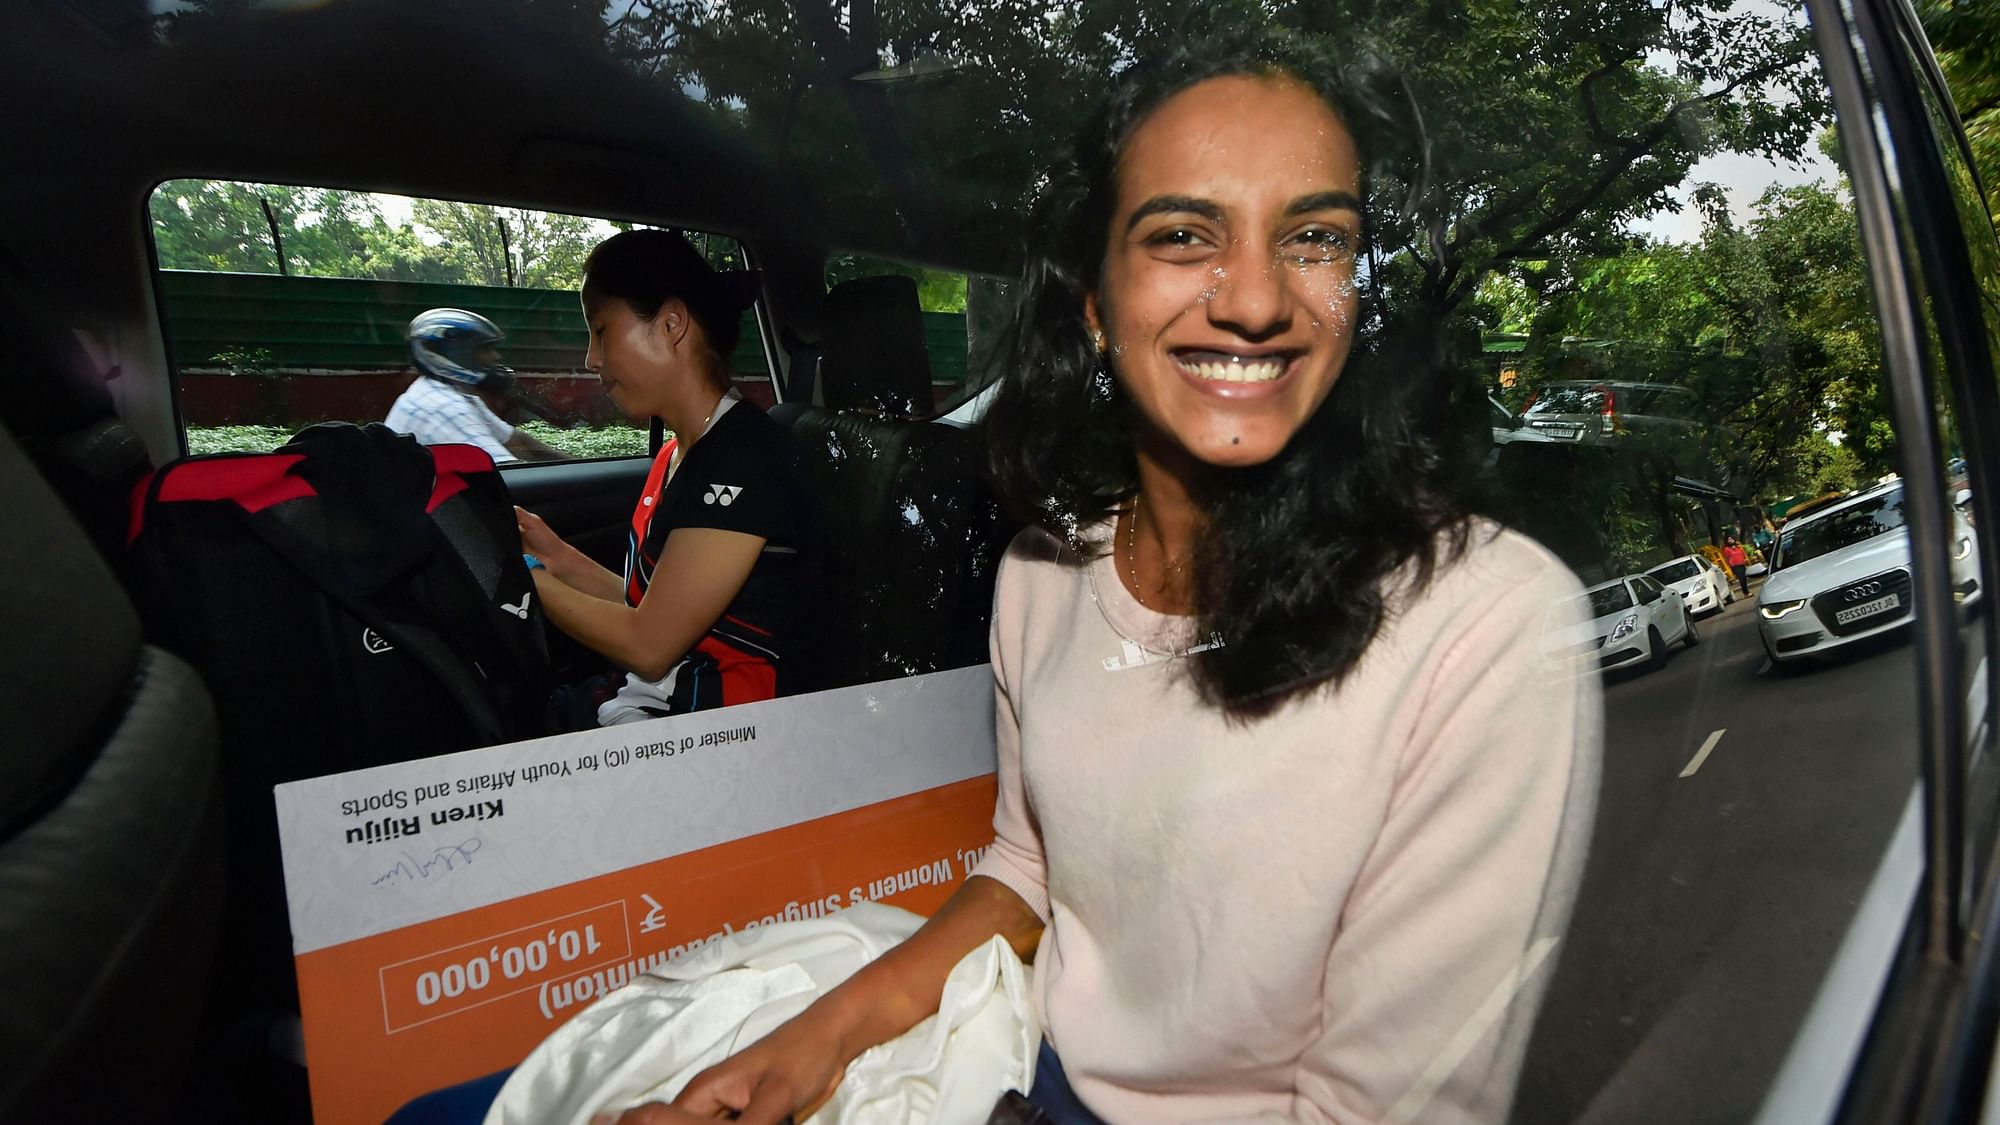 Despite the hectic schedule she has endured, Sindhu had a smile on her face as she acknowledged supporters and the media at the airport.